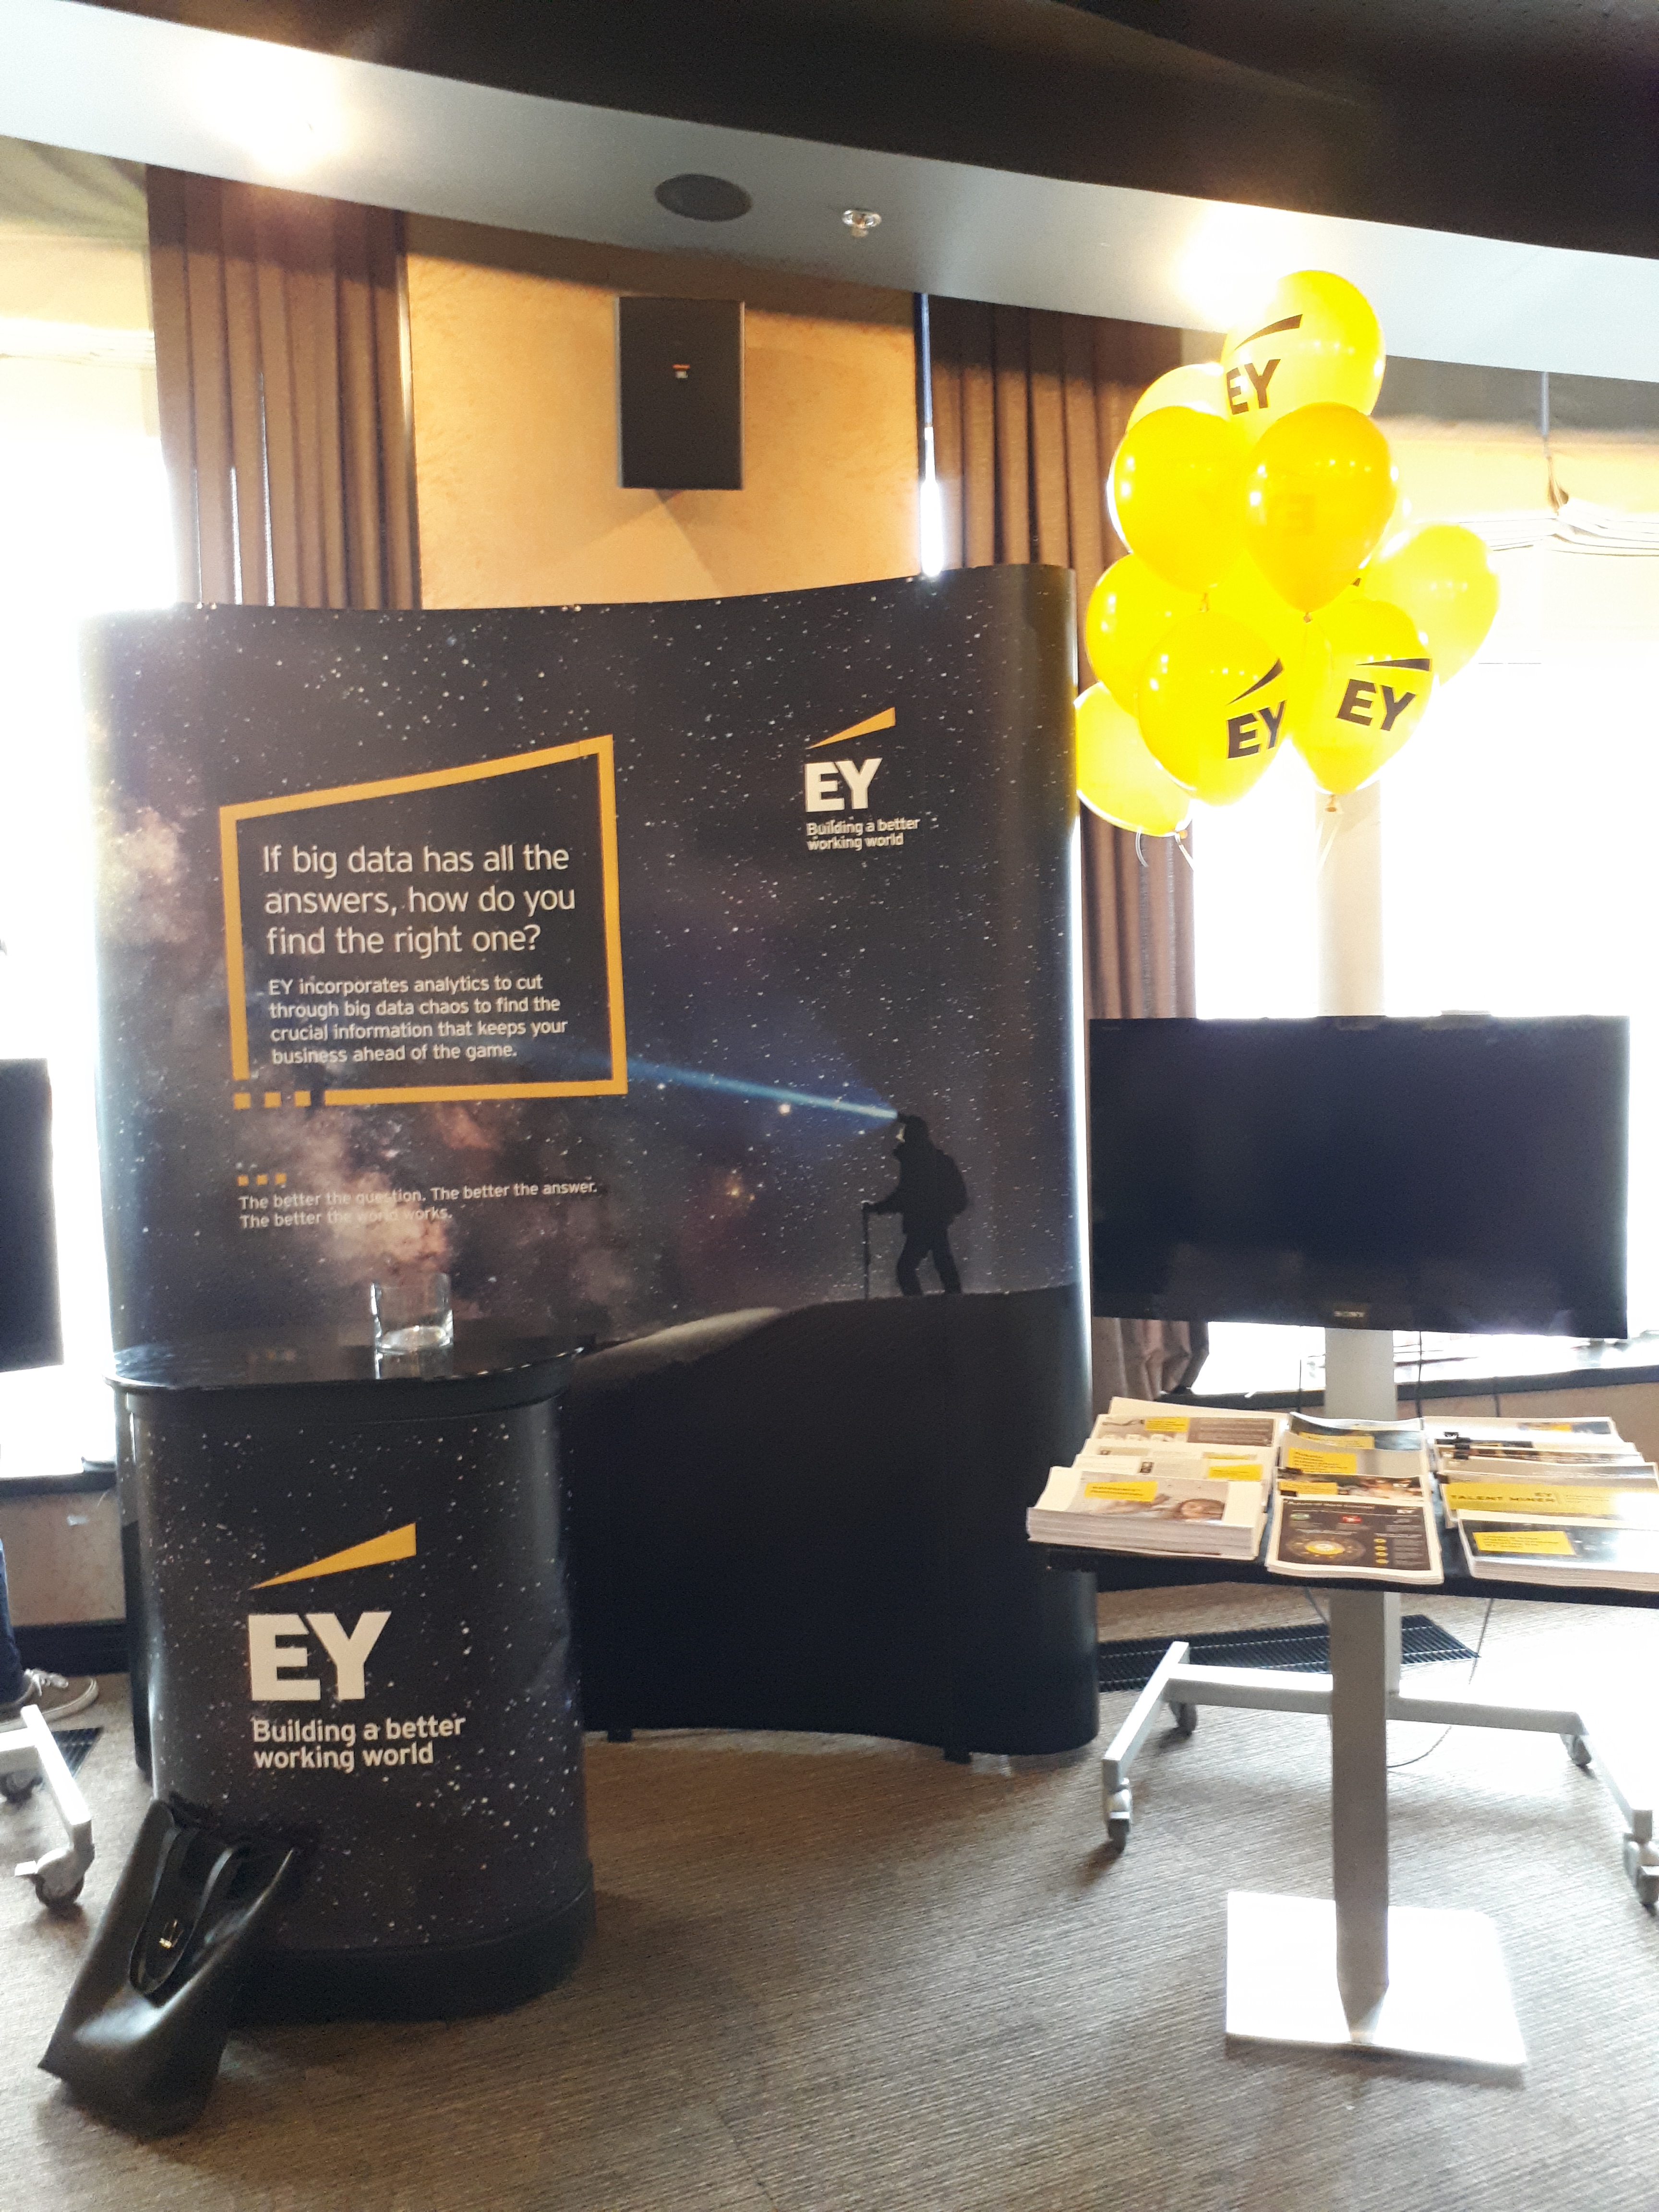 Promo materials Ernst & Young for business event